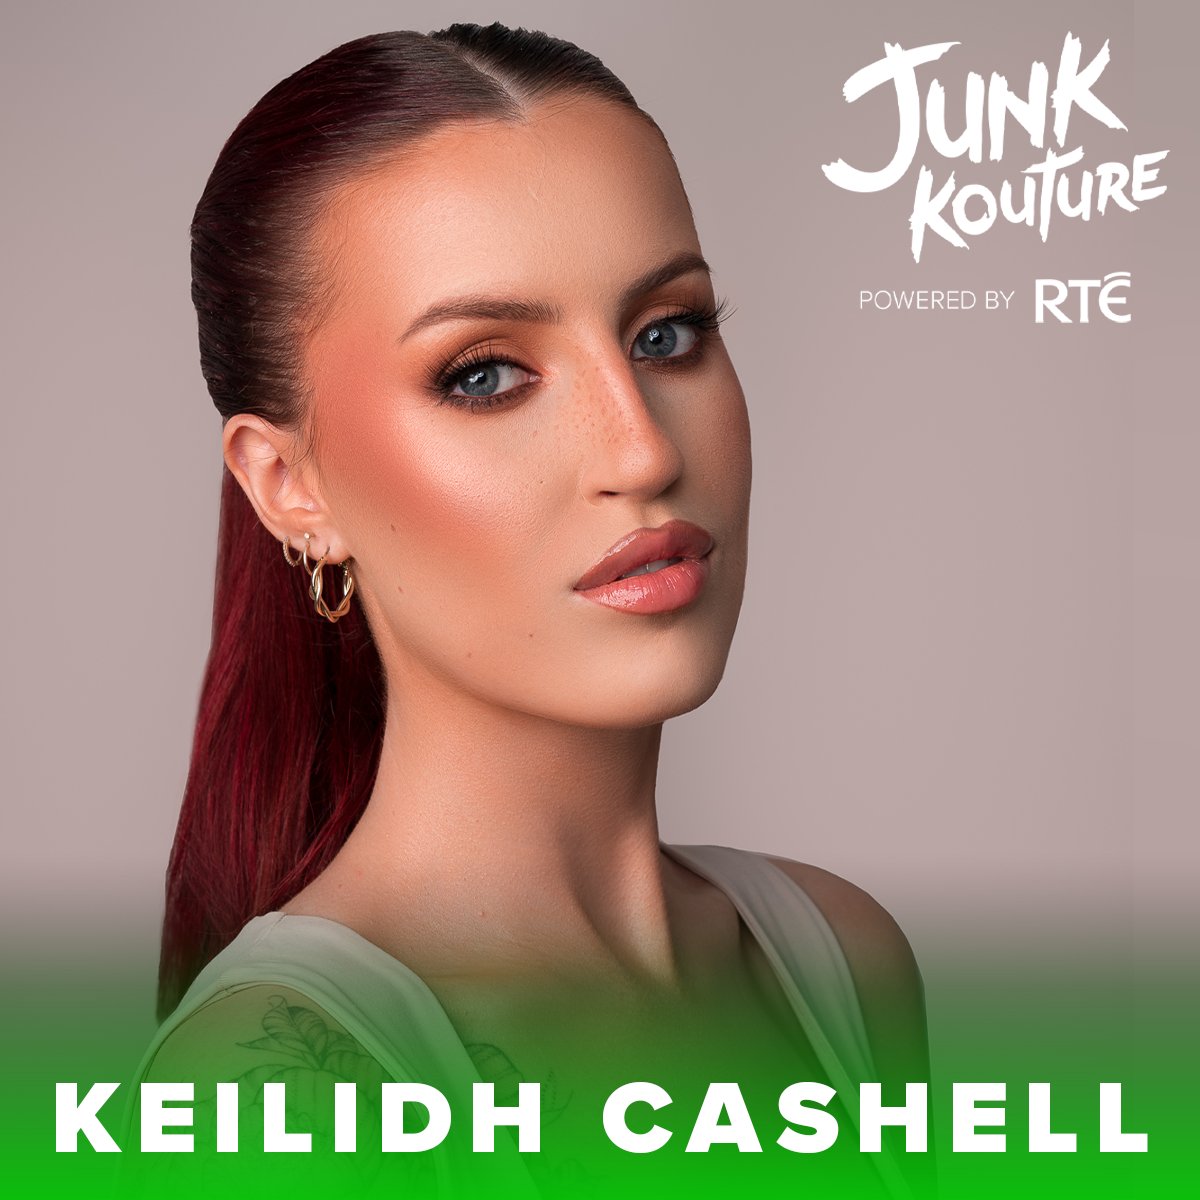 💄Keilidh Cashell - the woman behind KASH Beauty- is the latest addition to our Judging Panel for the Junk Kouture Dublin City Final Powered by RTE 🎫 Get your tickets now! ow.ly/3Vbr50NQkeJ  @explore_rte